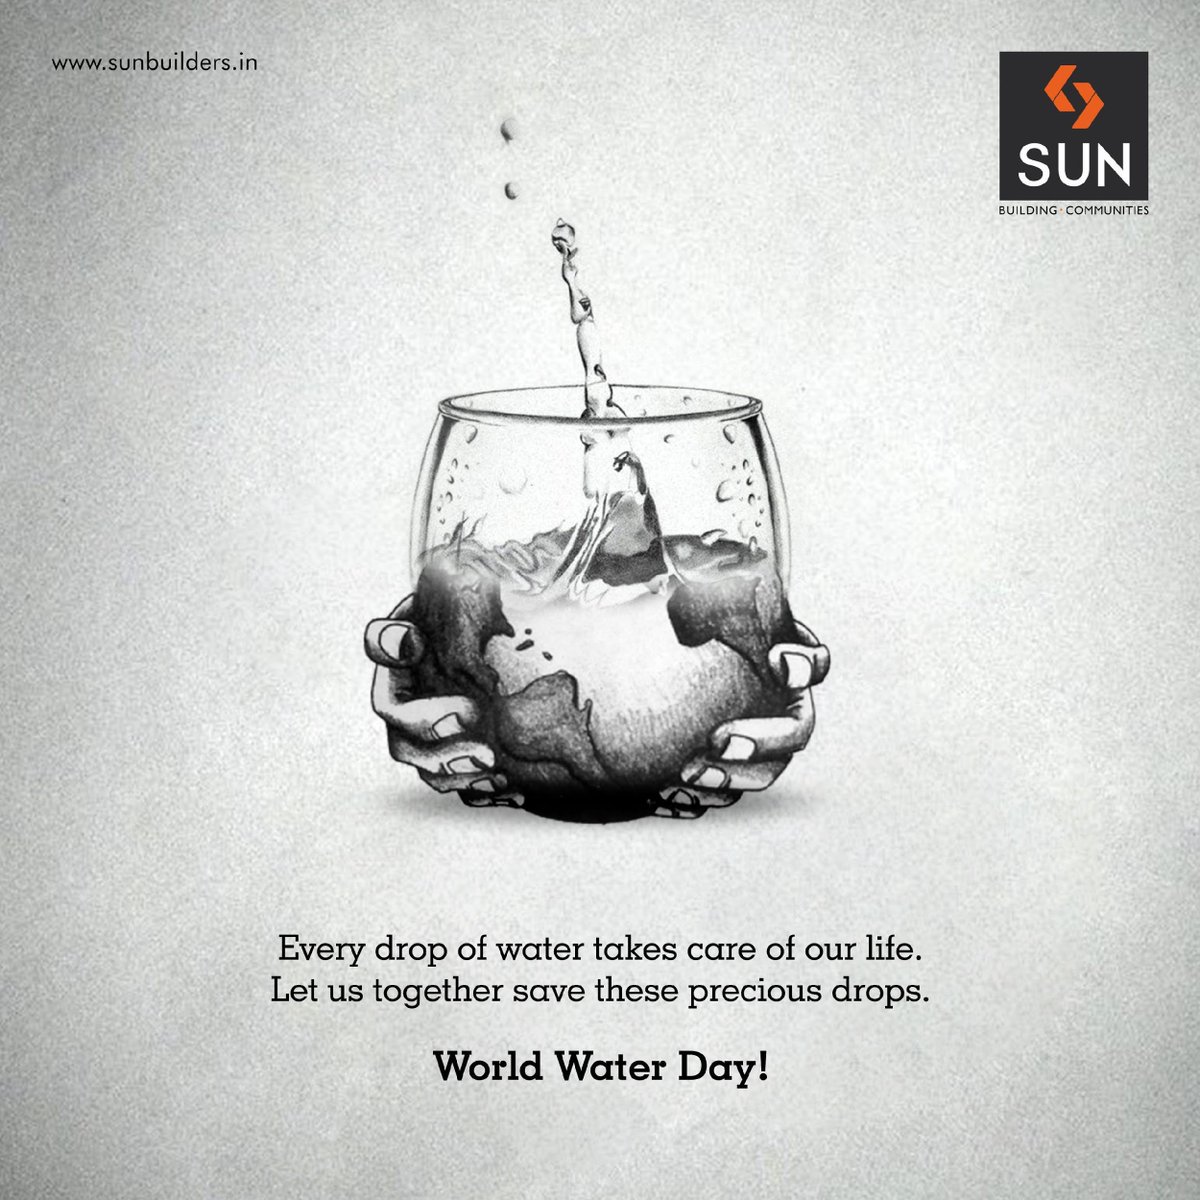 Water is the important reason of survival. Save water to save over million lives including your own.
#WorldWaterDay https://t.co/hrfEMqur0h